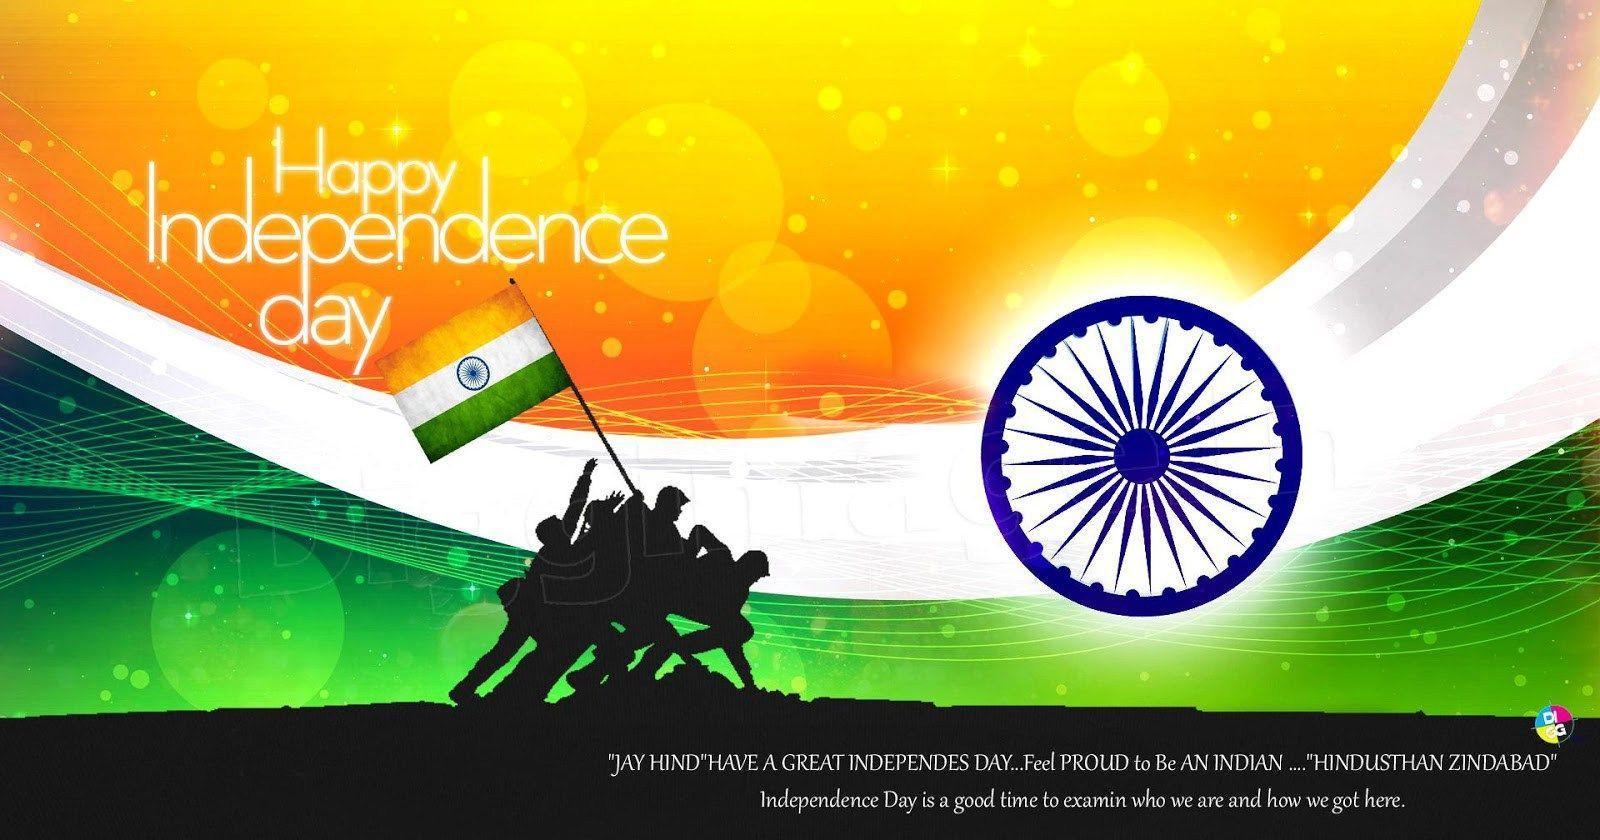 Happy Independence Day 2016 Quotes Image wallpaper